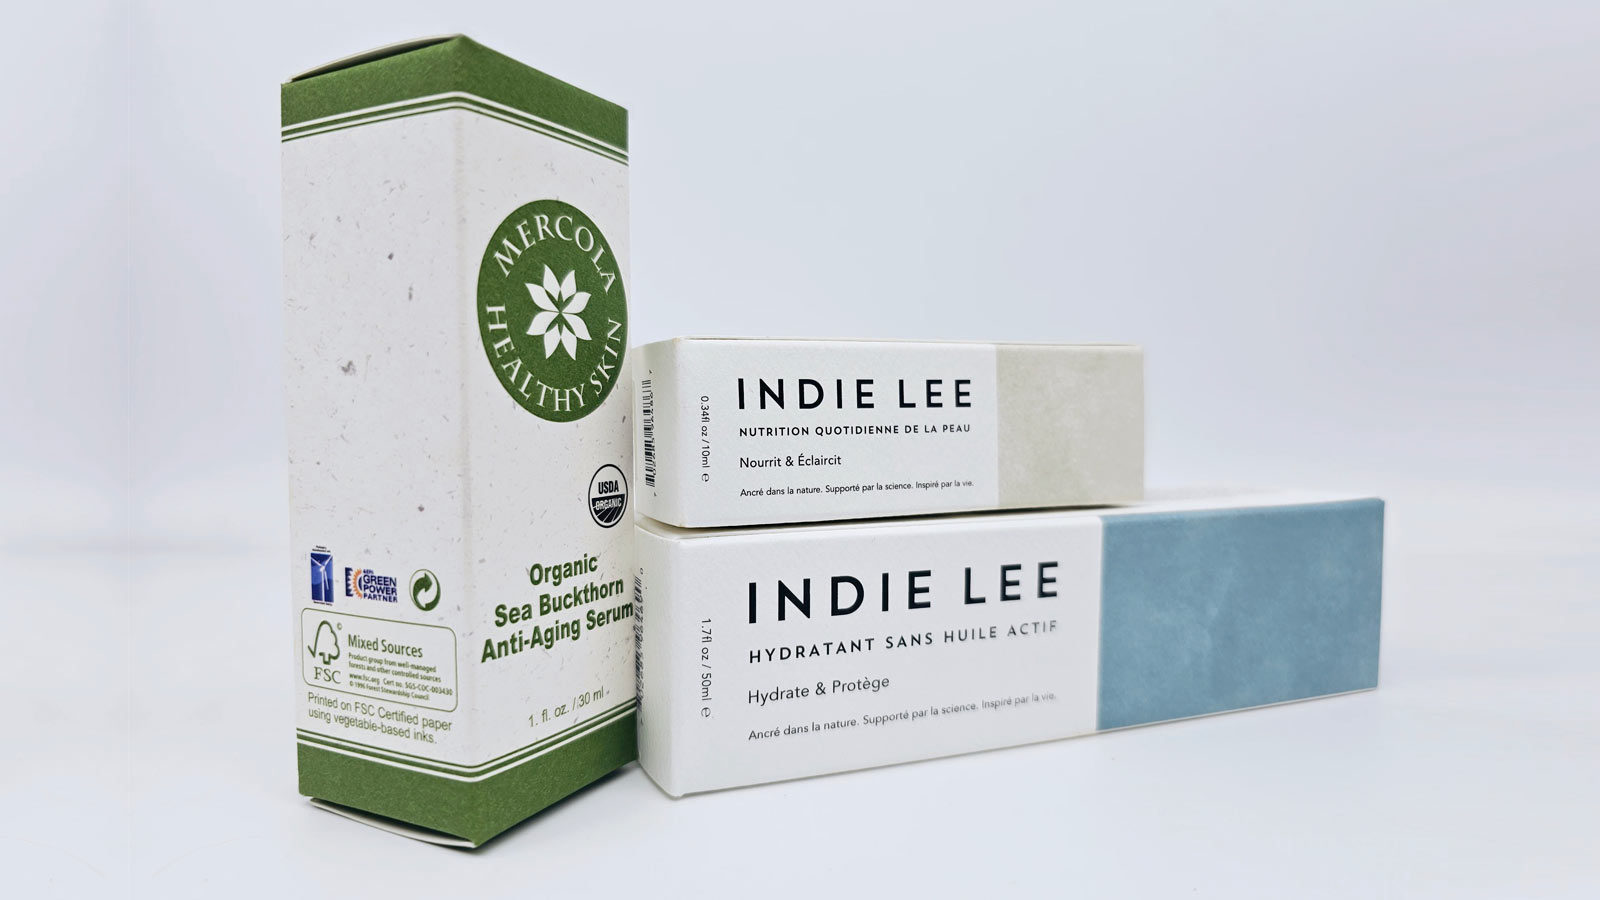 mercola healthy skin and indie lee product packages on white backdrop